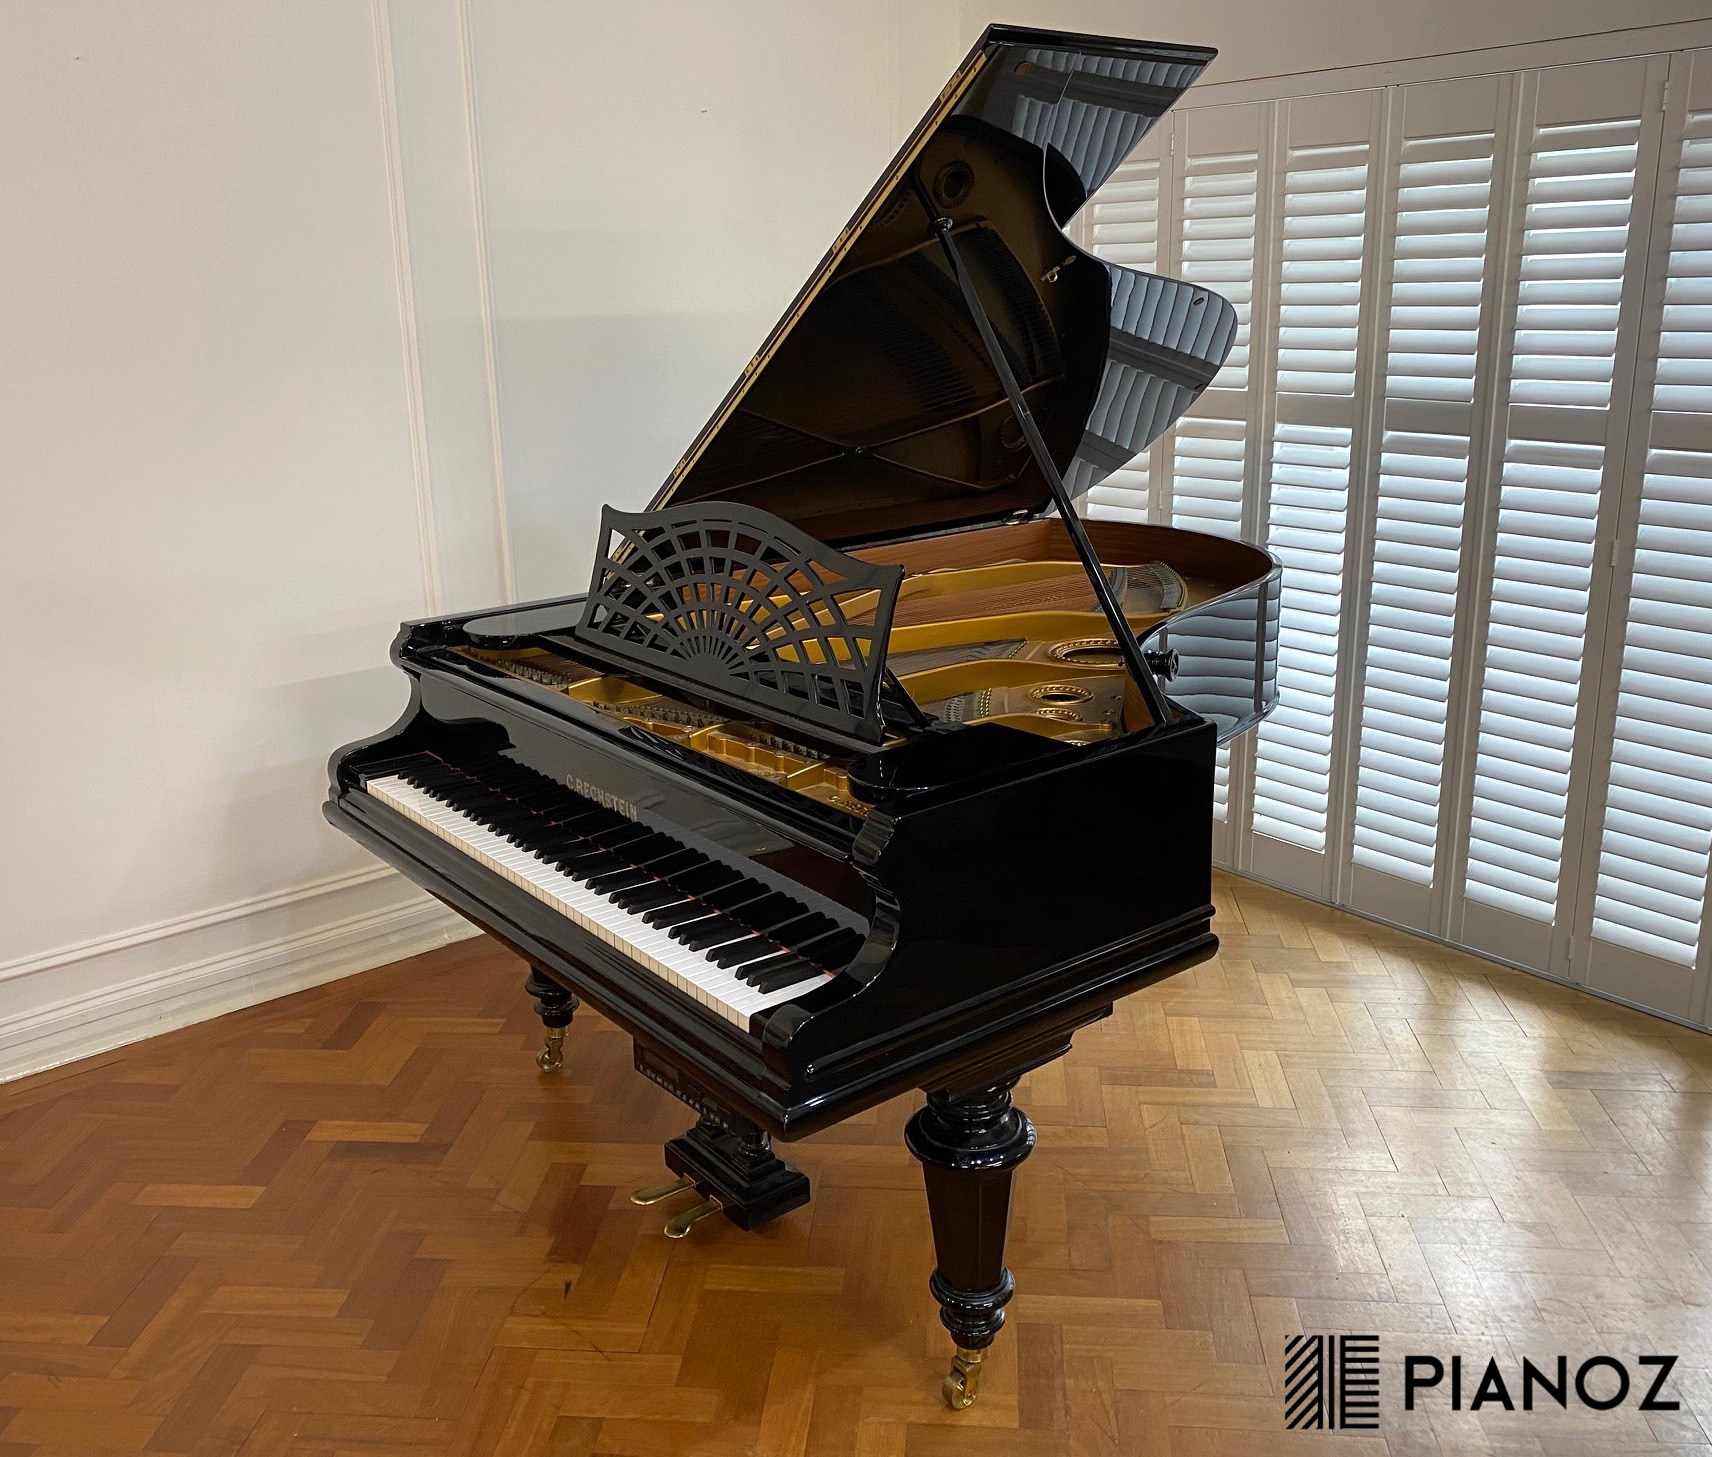 C. Bechstein Model B Pianodisc Grand Piano piano for sale in UK